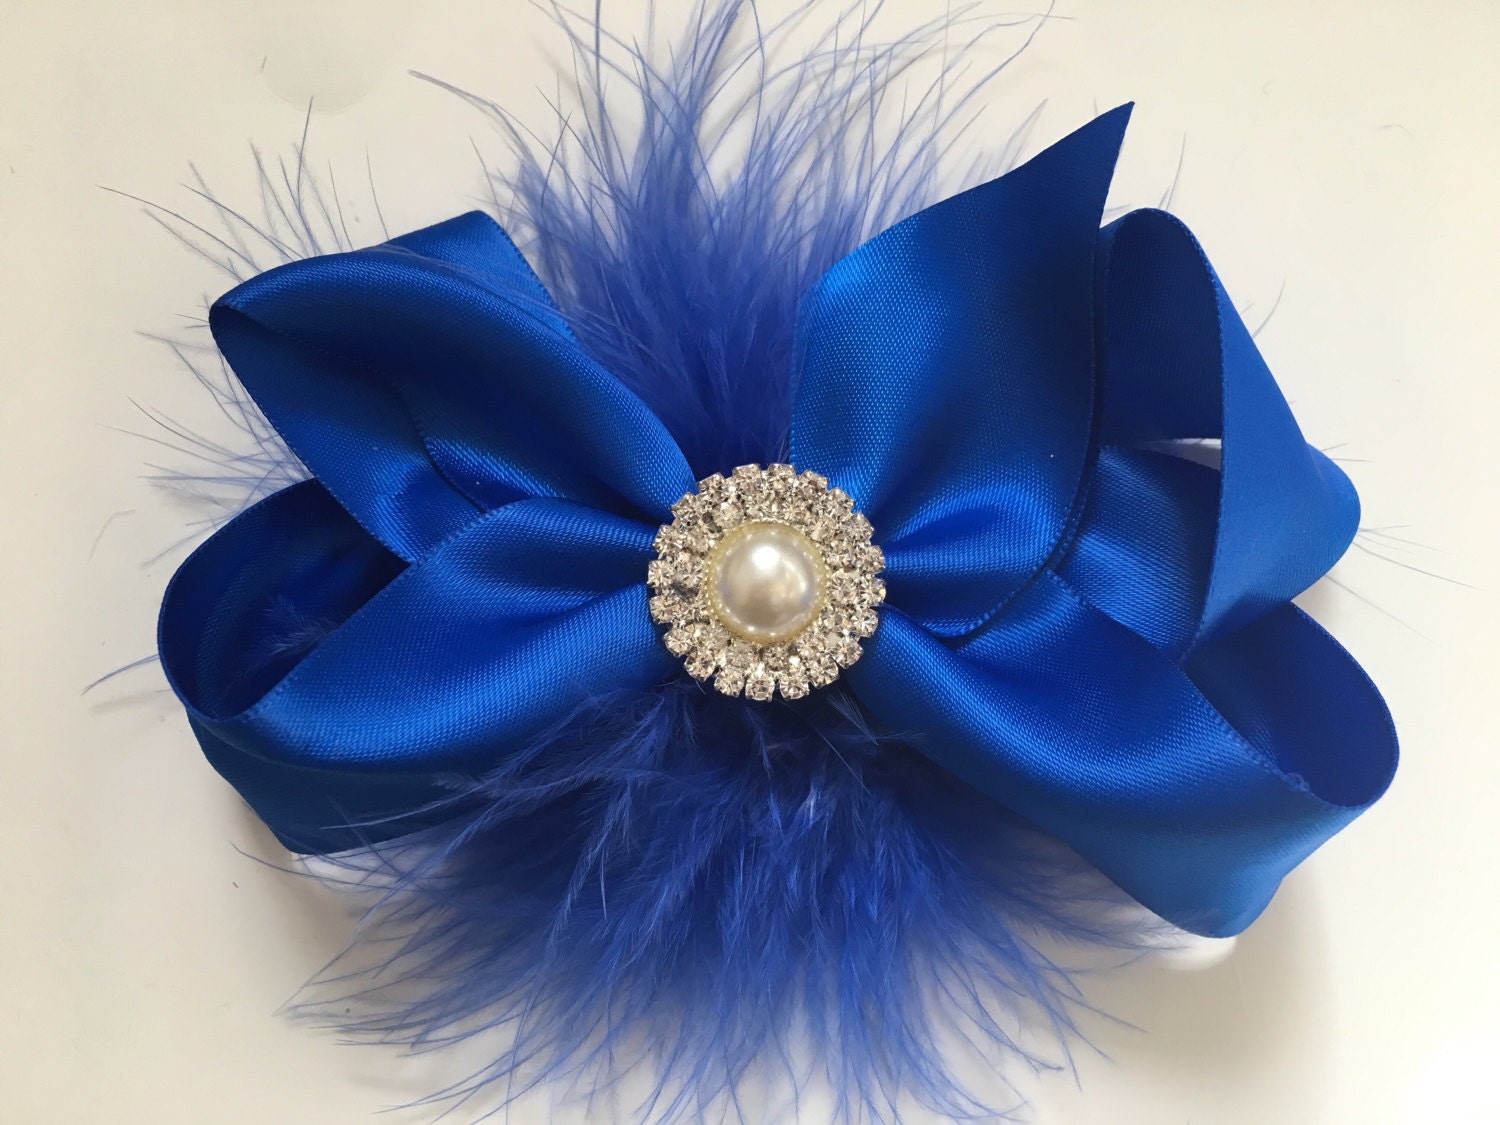 Large Blue Hair Bow - Velvet Bow with Pearl Embellishment - wide 5